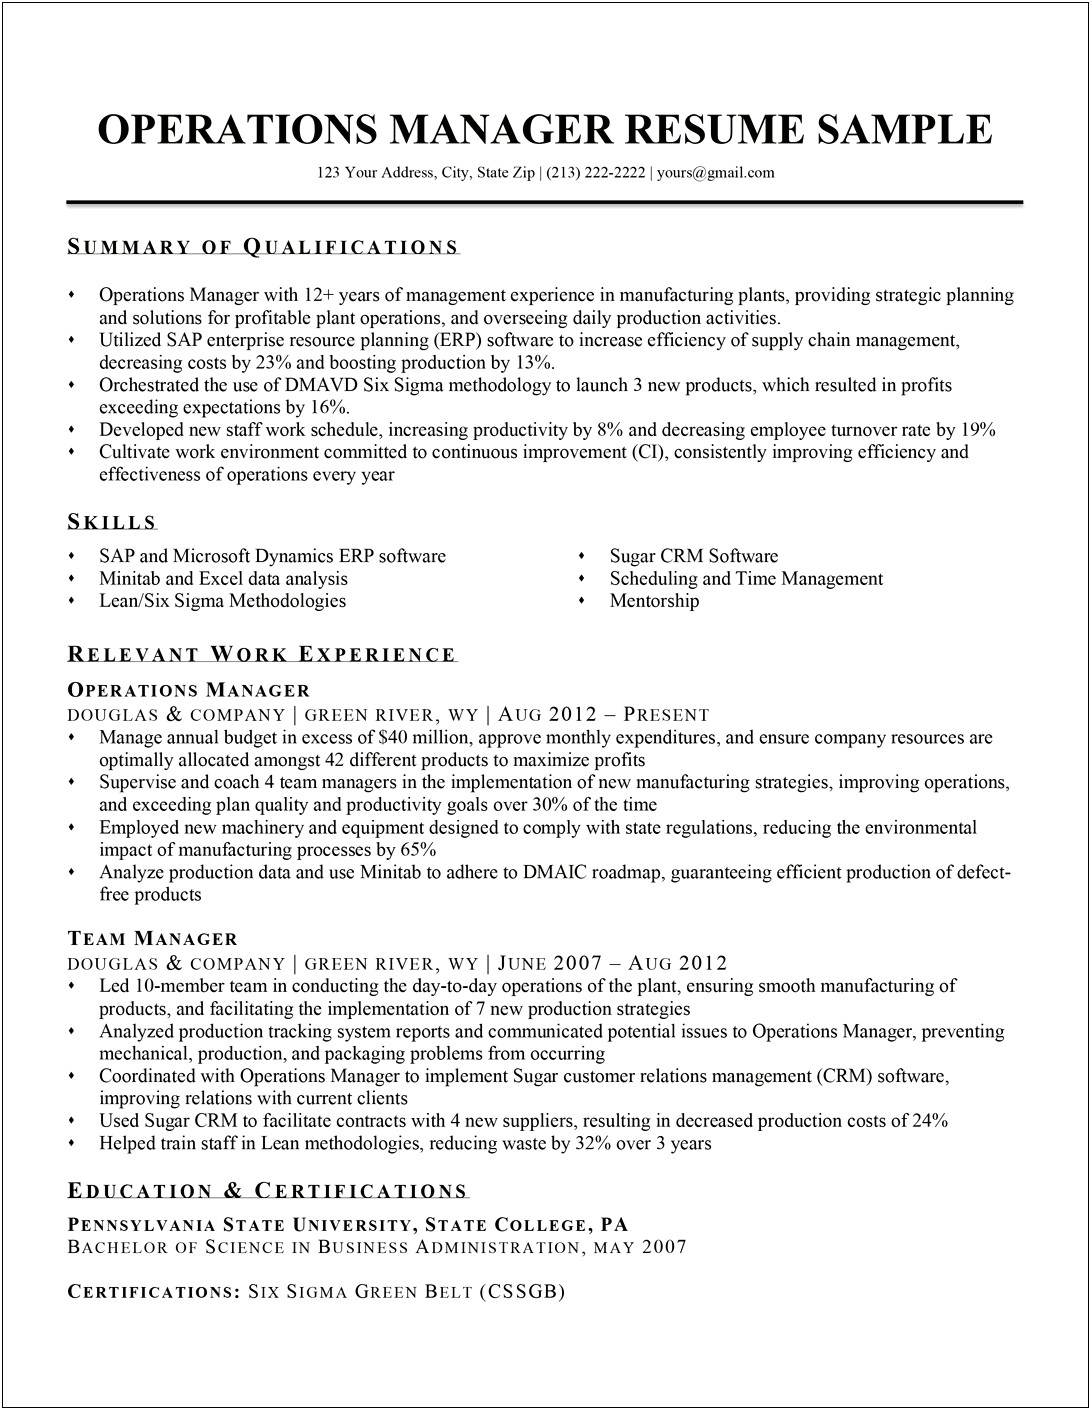 Human Resource Manager Resume With Just School Experience